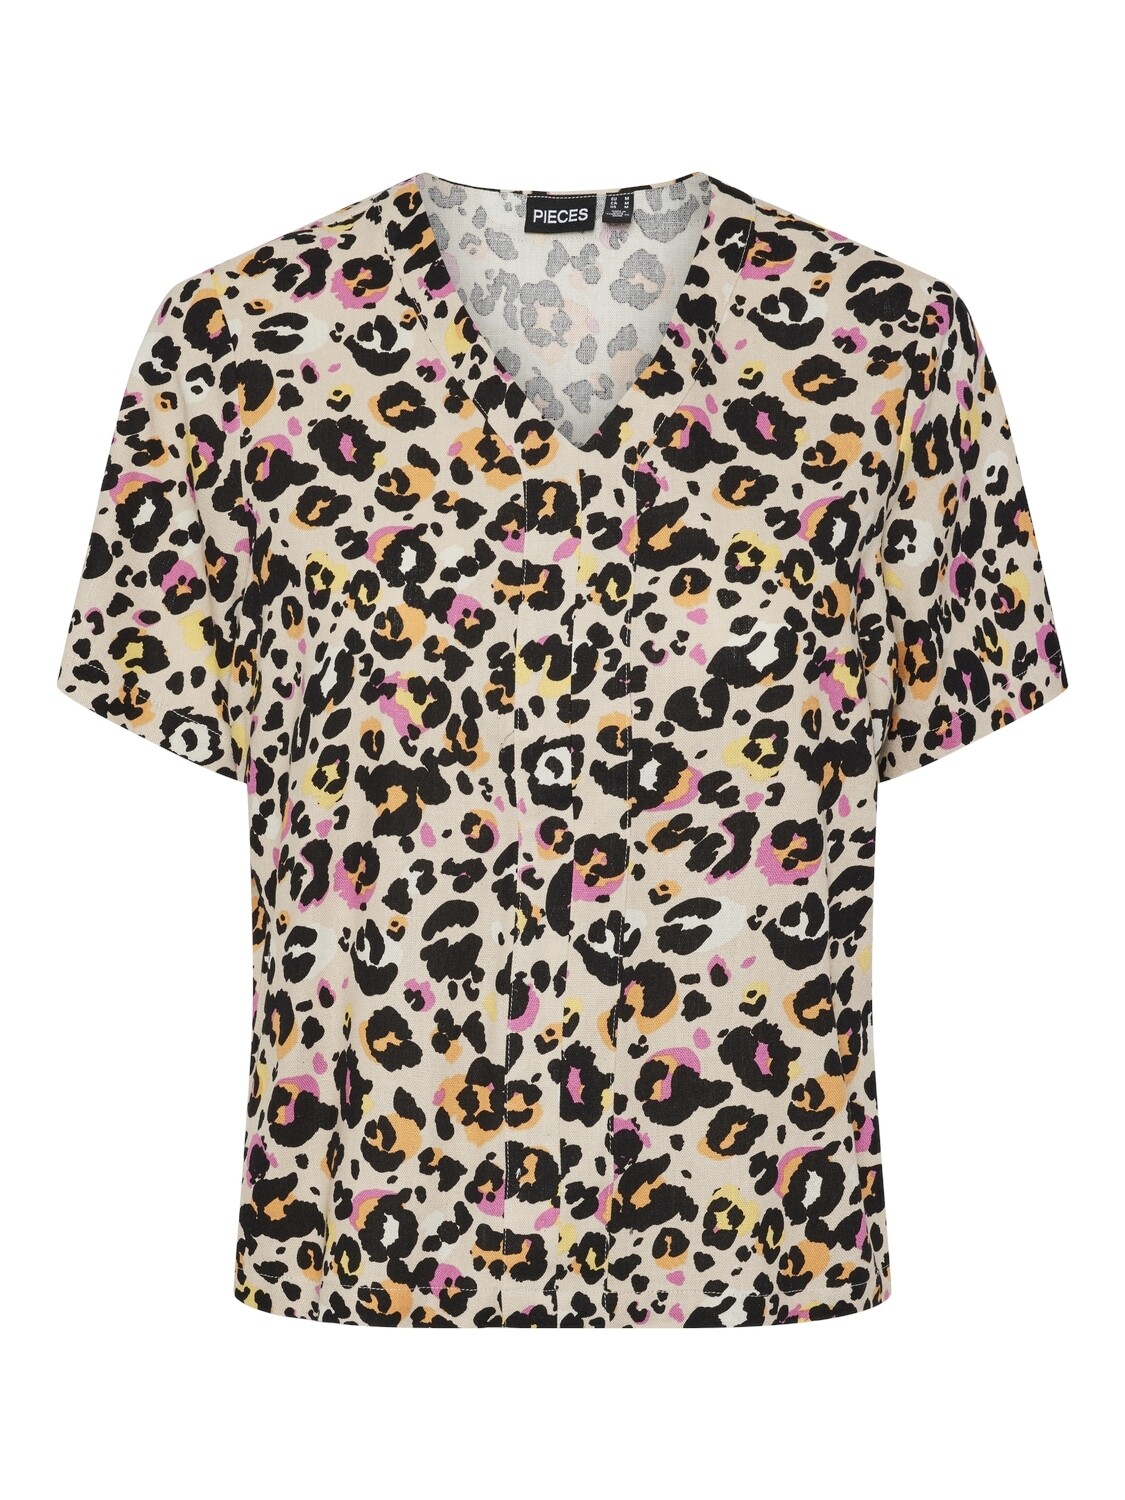 PCARLEM SS V-NECK TOP Cement/GRAPHIC LEO